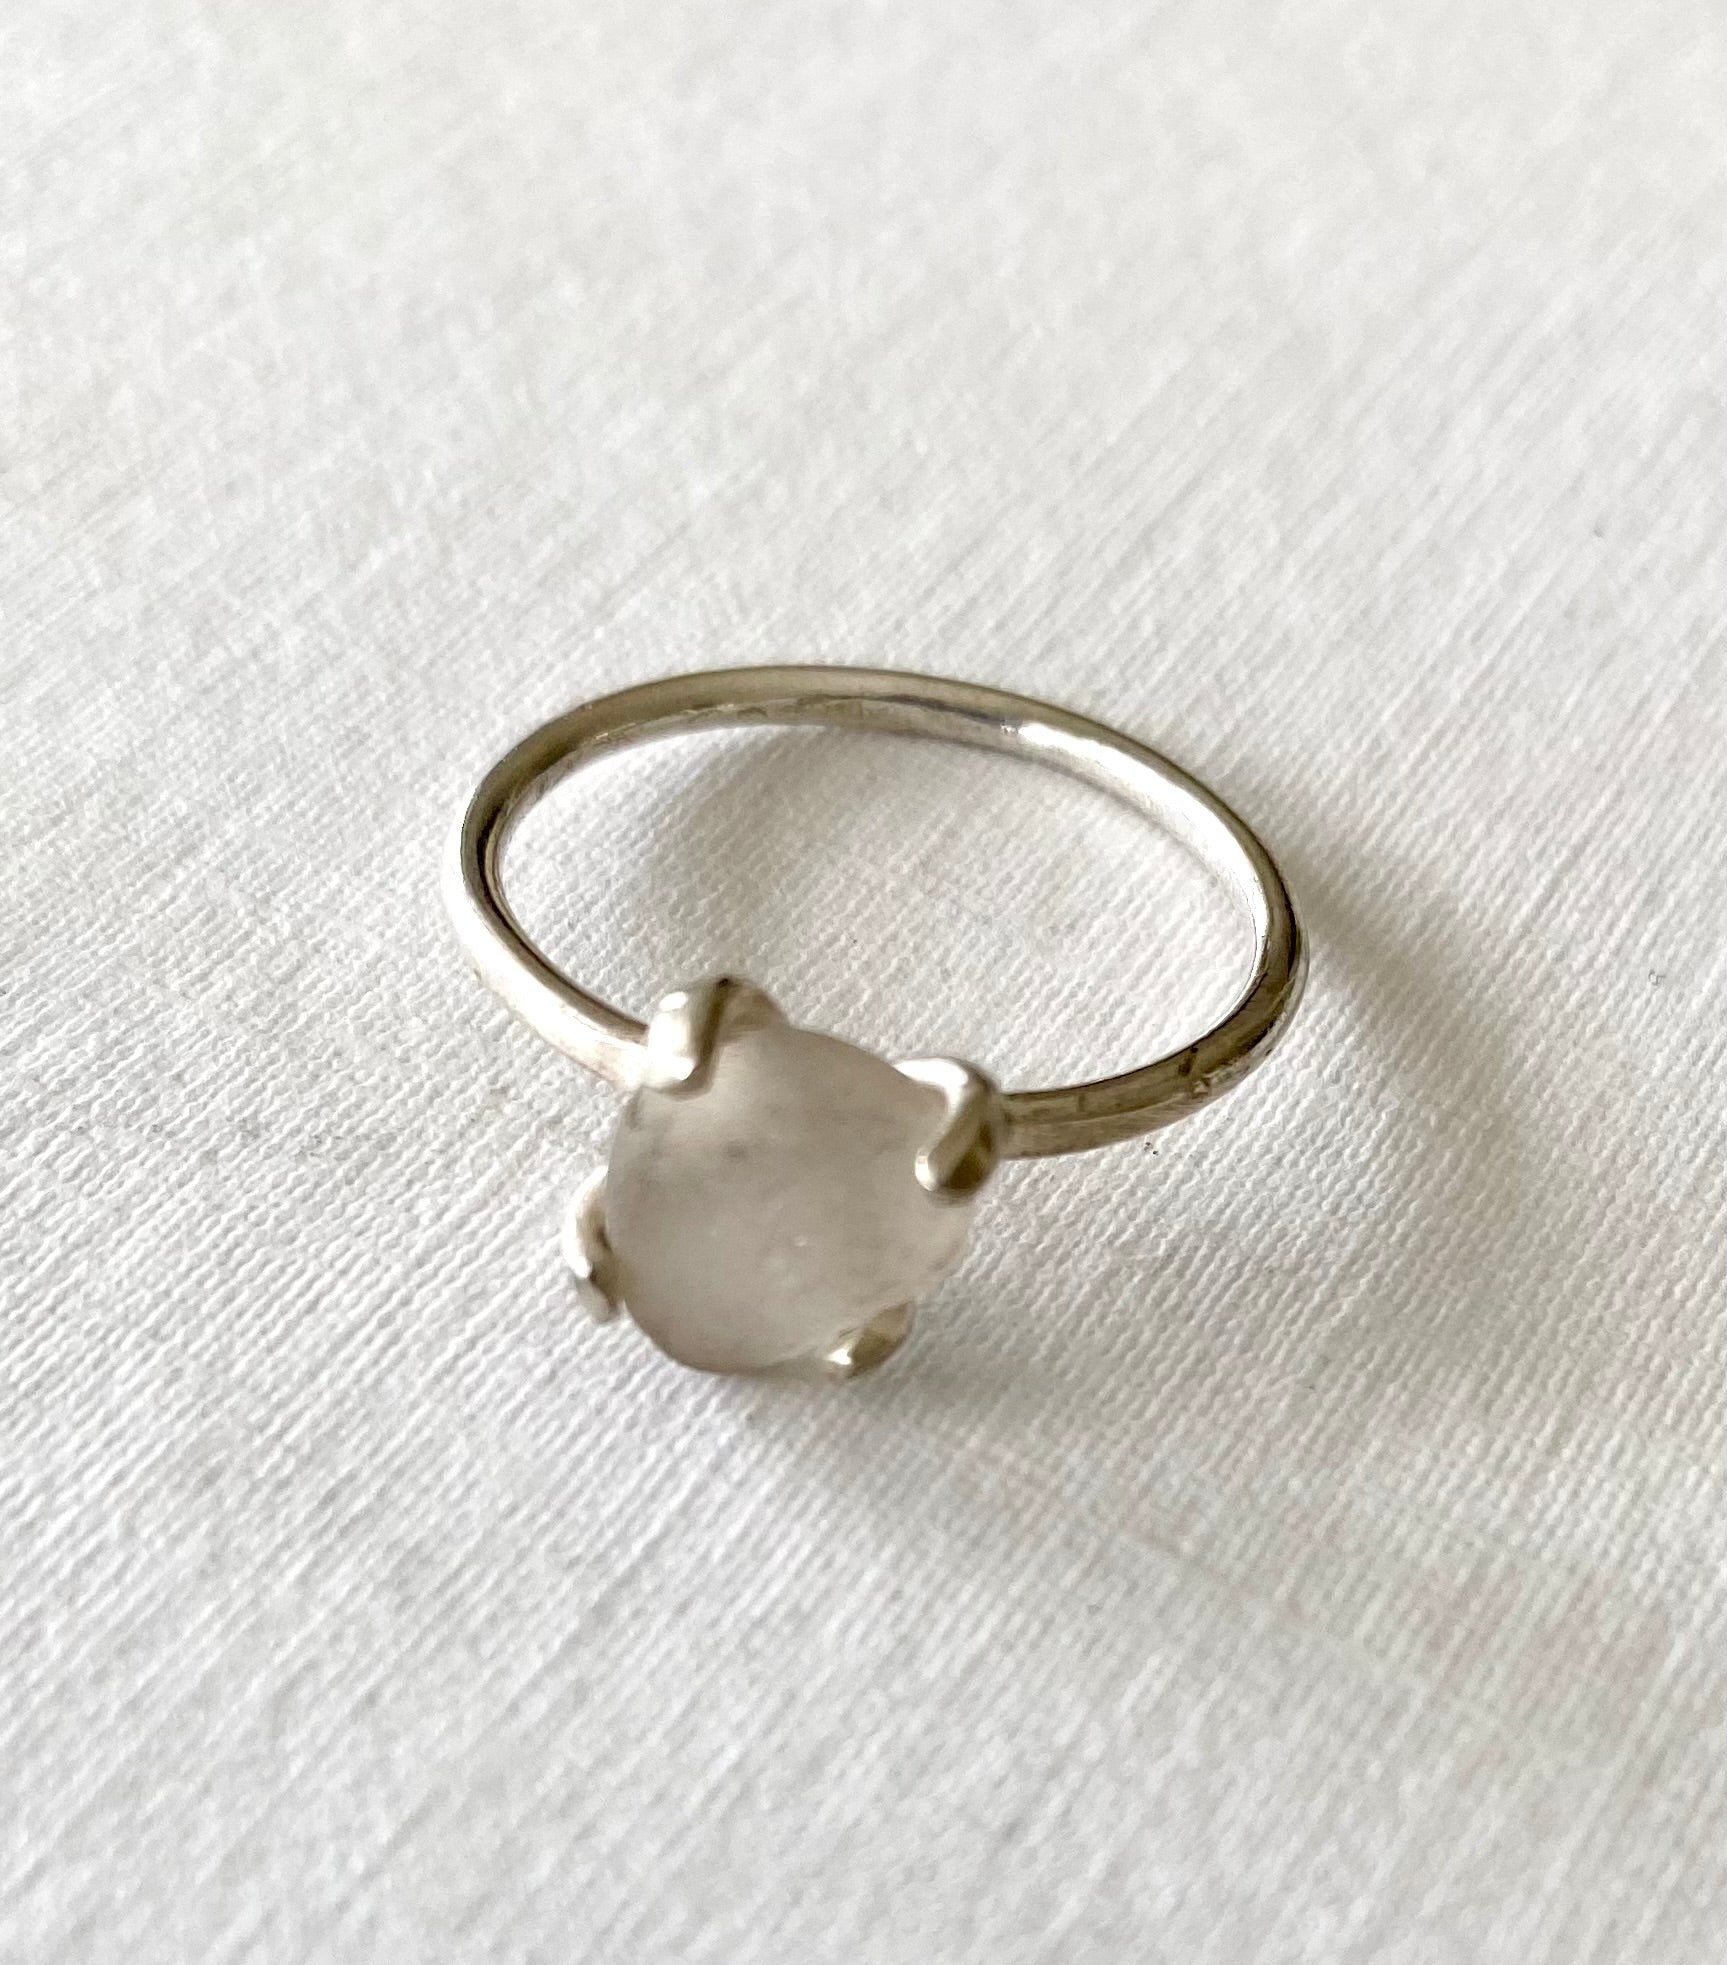 Elegant sterling silver ring featuring a soft white sea glass nugget, highlighted against a textured white backdrop.